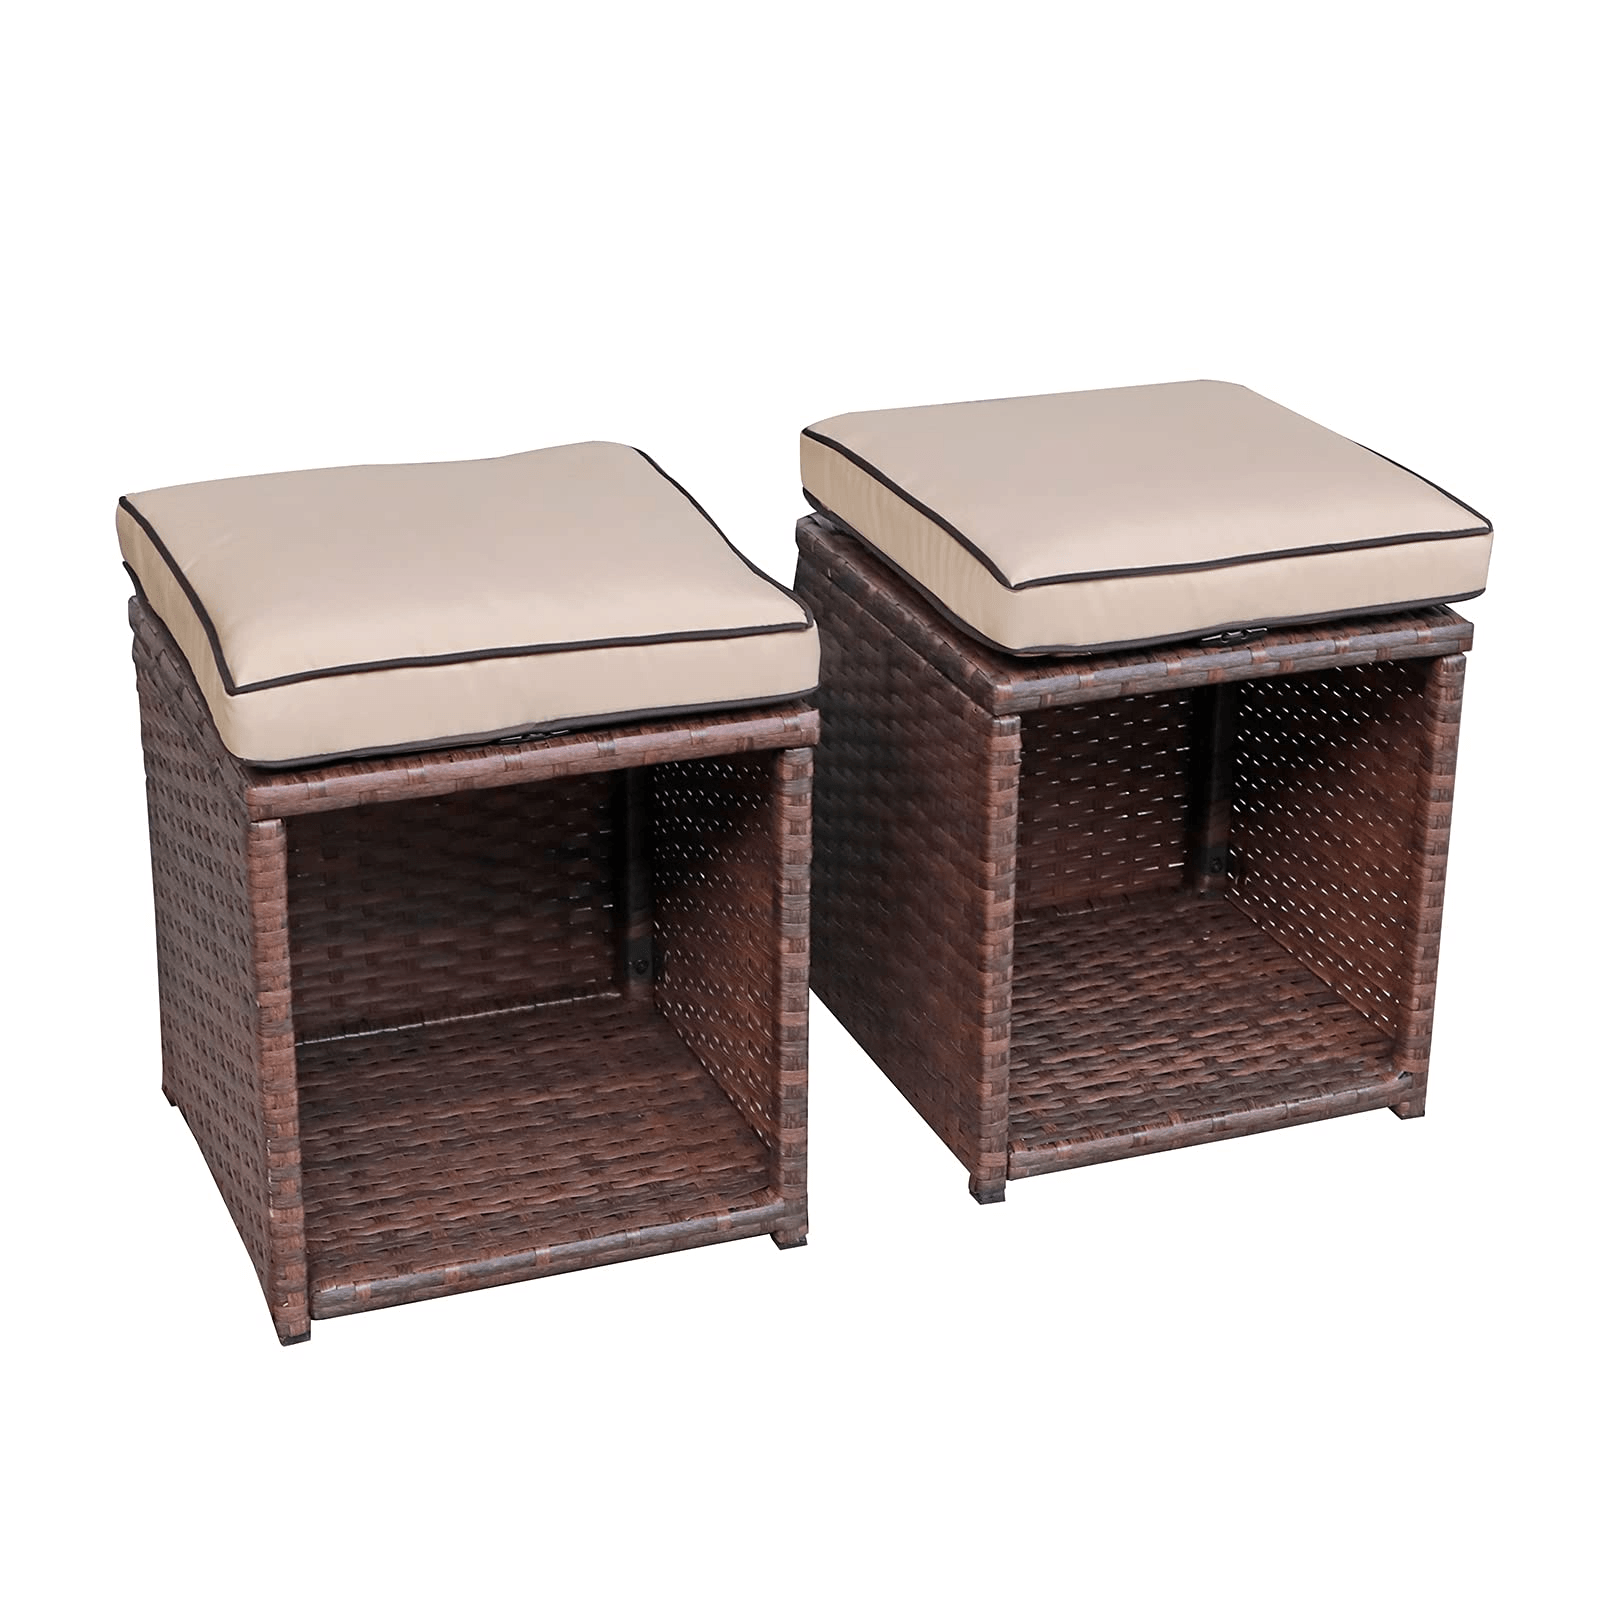 Amberley 2-pc. Outdoor Patio Ottoman, with Storage Space, Brown - OrangeCasual